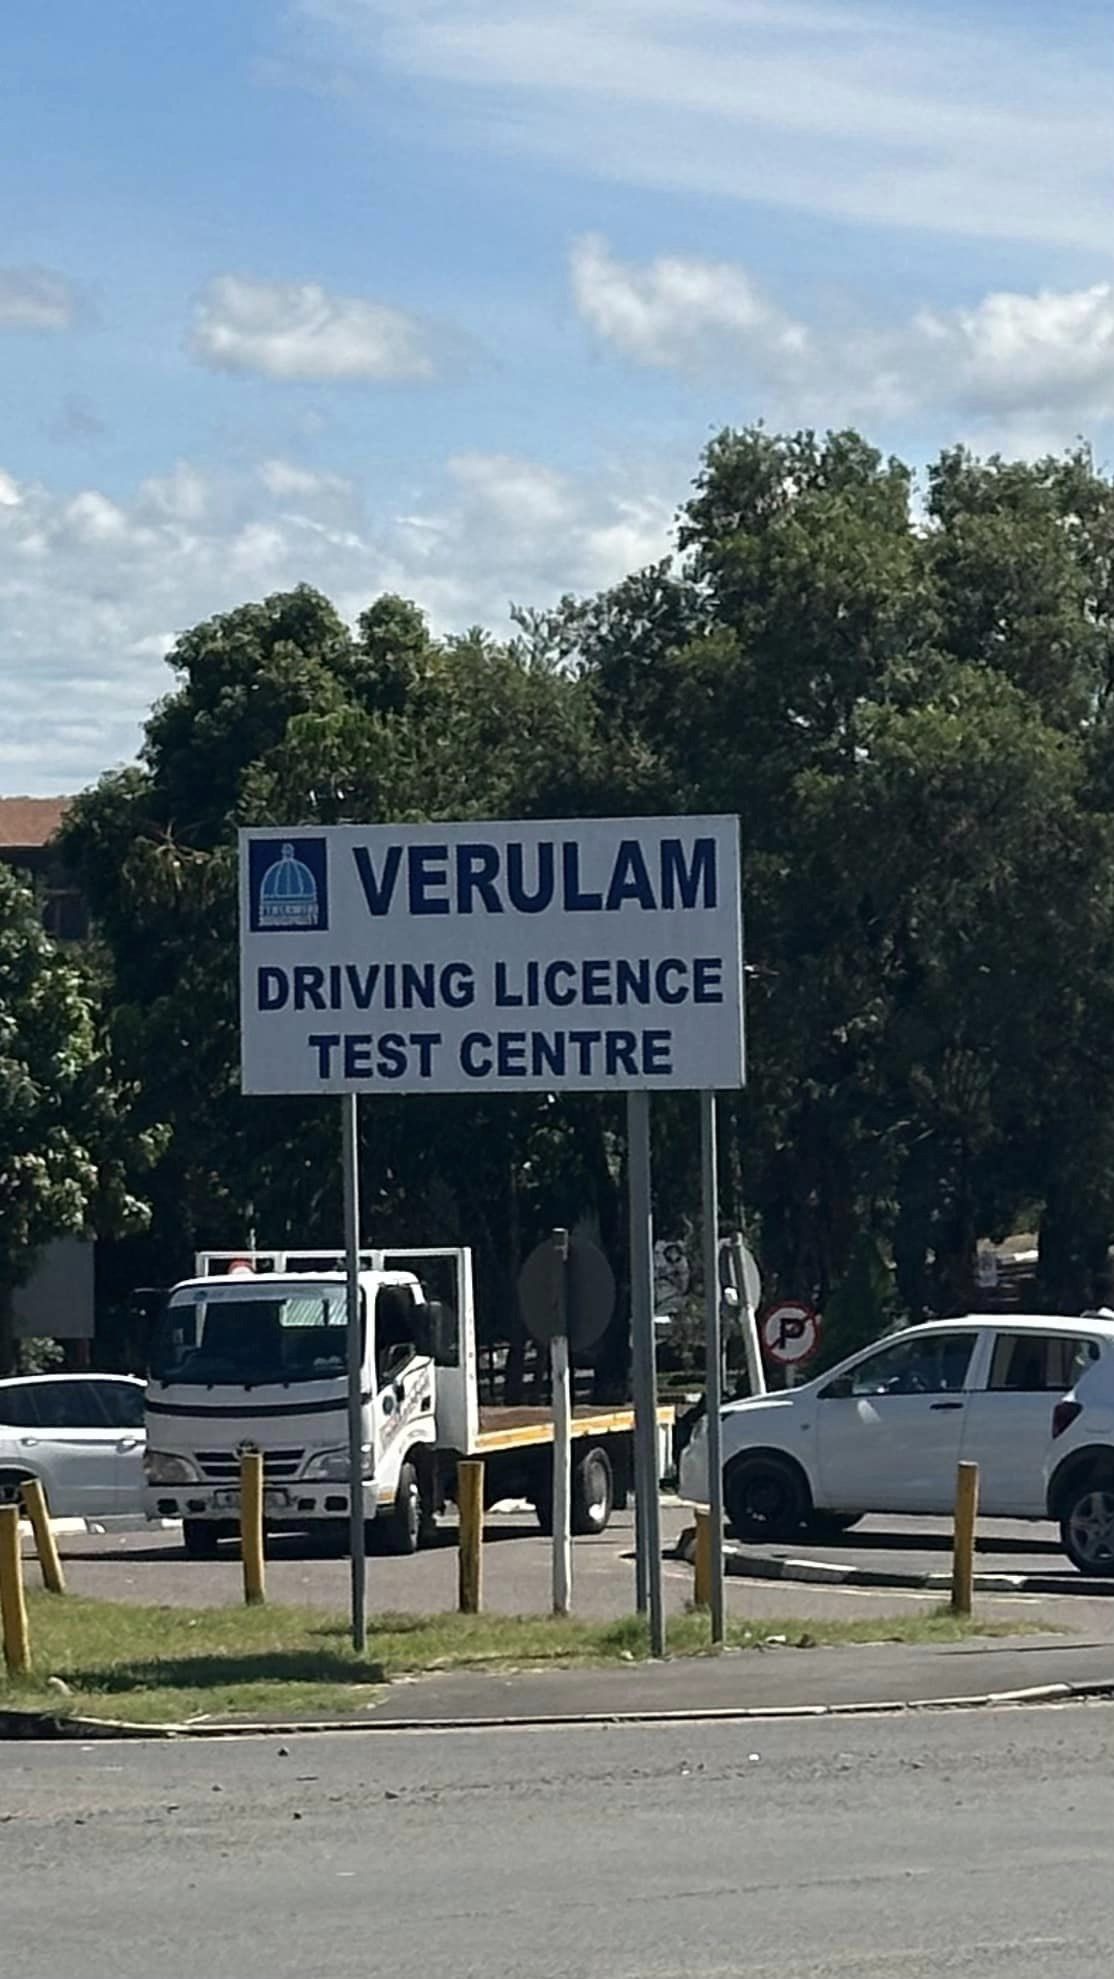 Theft of vehicle at the Verulam Driving Licence Test Centre